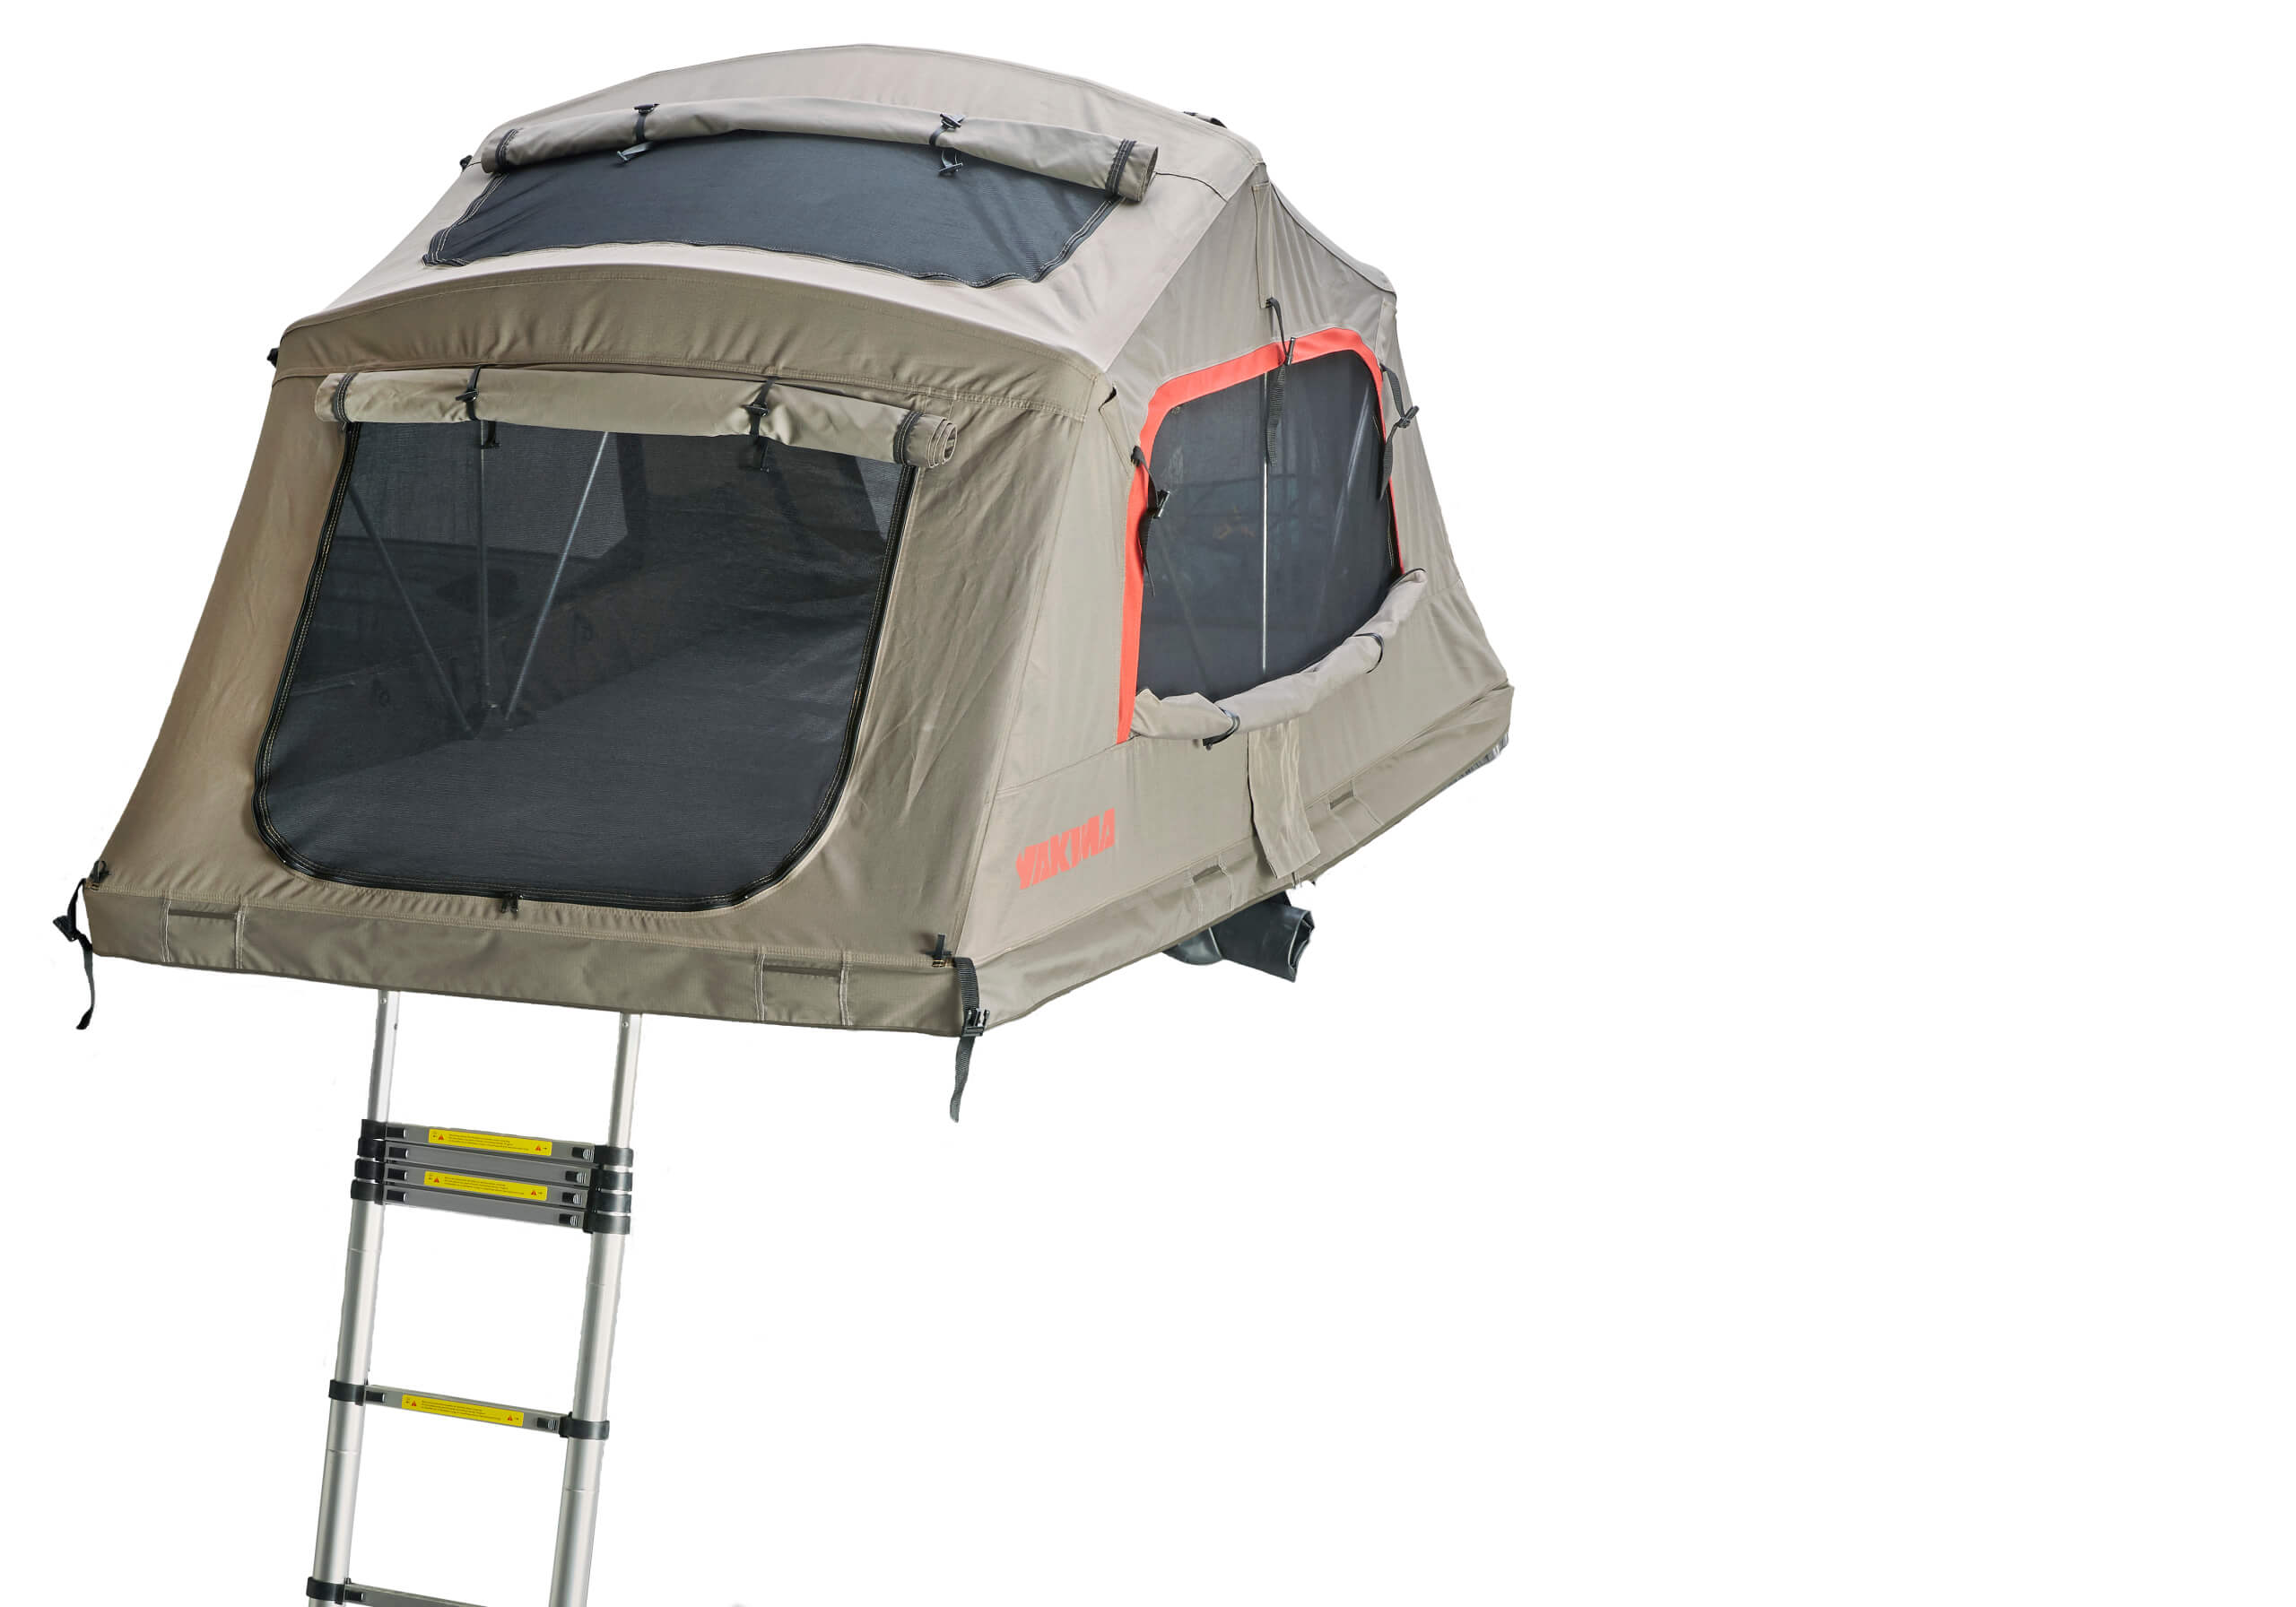 :Yakima SkyRise HD vehicle rooftop tent, small, tan and red, 8007436